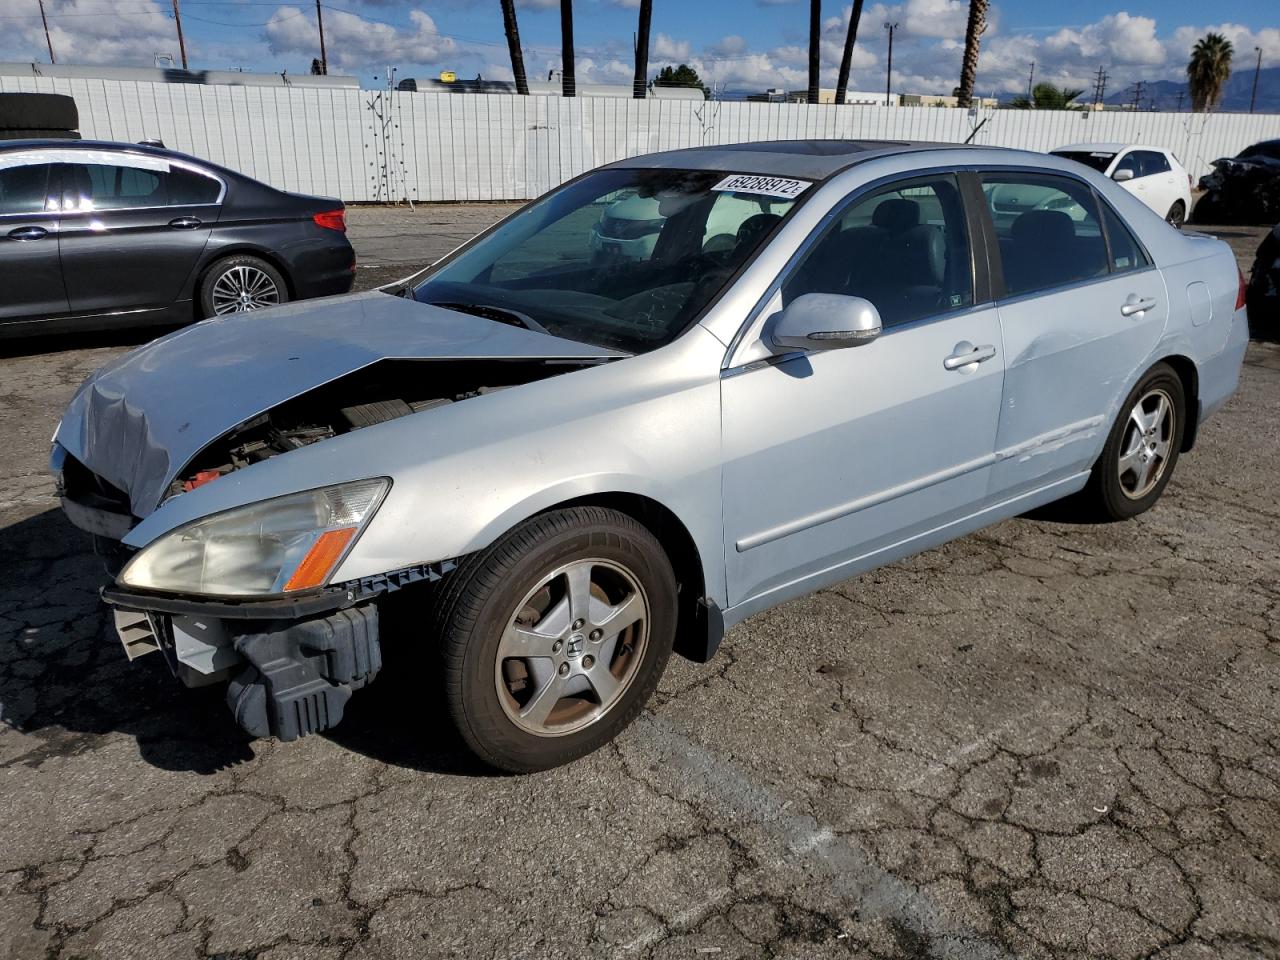 2006 Honda Accord Hybrid for sale at Copart Van Nuys, CA Lot #69288*** |  SalvageReseller.com